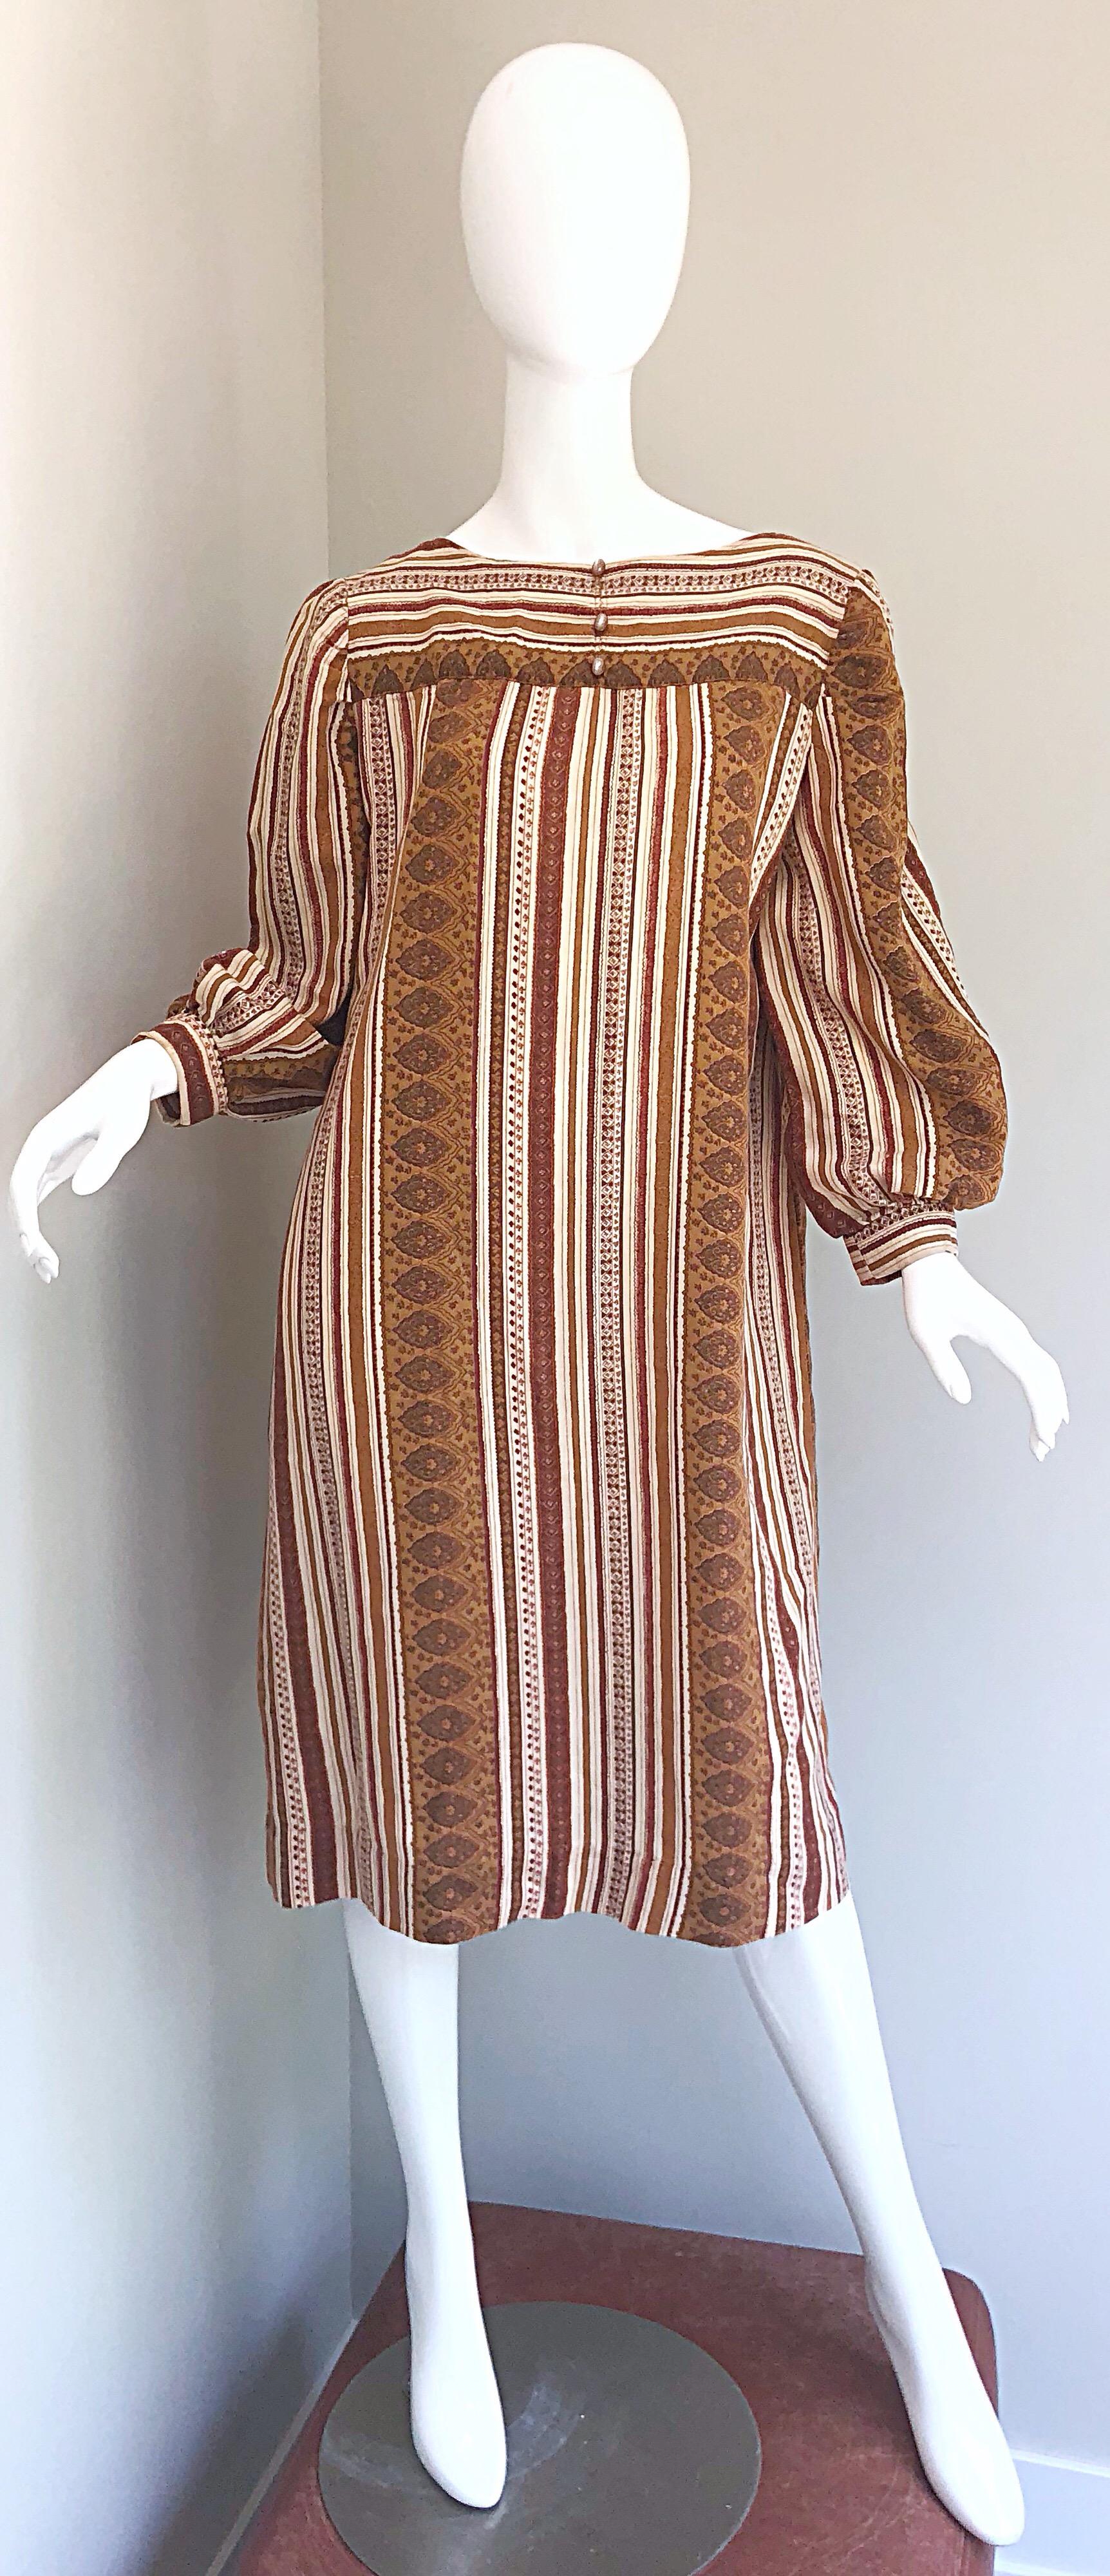 Boho chic brown, tan and ivory cotton sac dress! Reminiscent of the Yves Saint Laurent 1976 Russian Collection, this easy to wear gem is both stylish and comfortable. Features three mock buttons at center neck. Simply slips over the head. Great